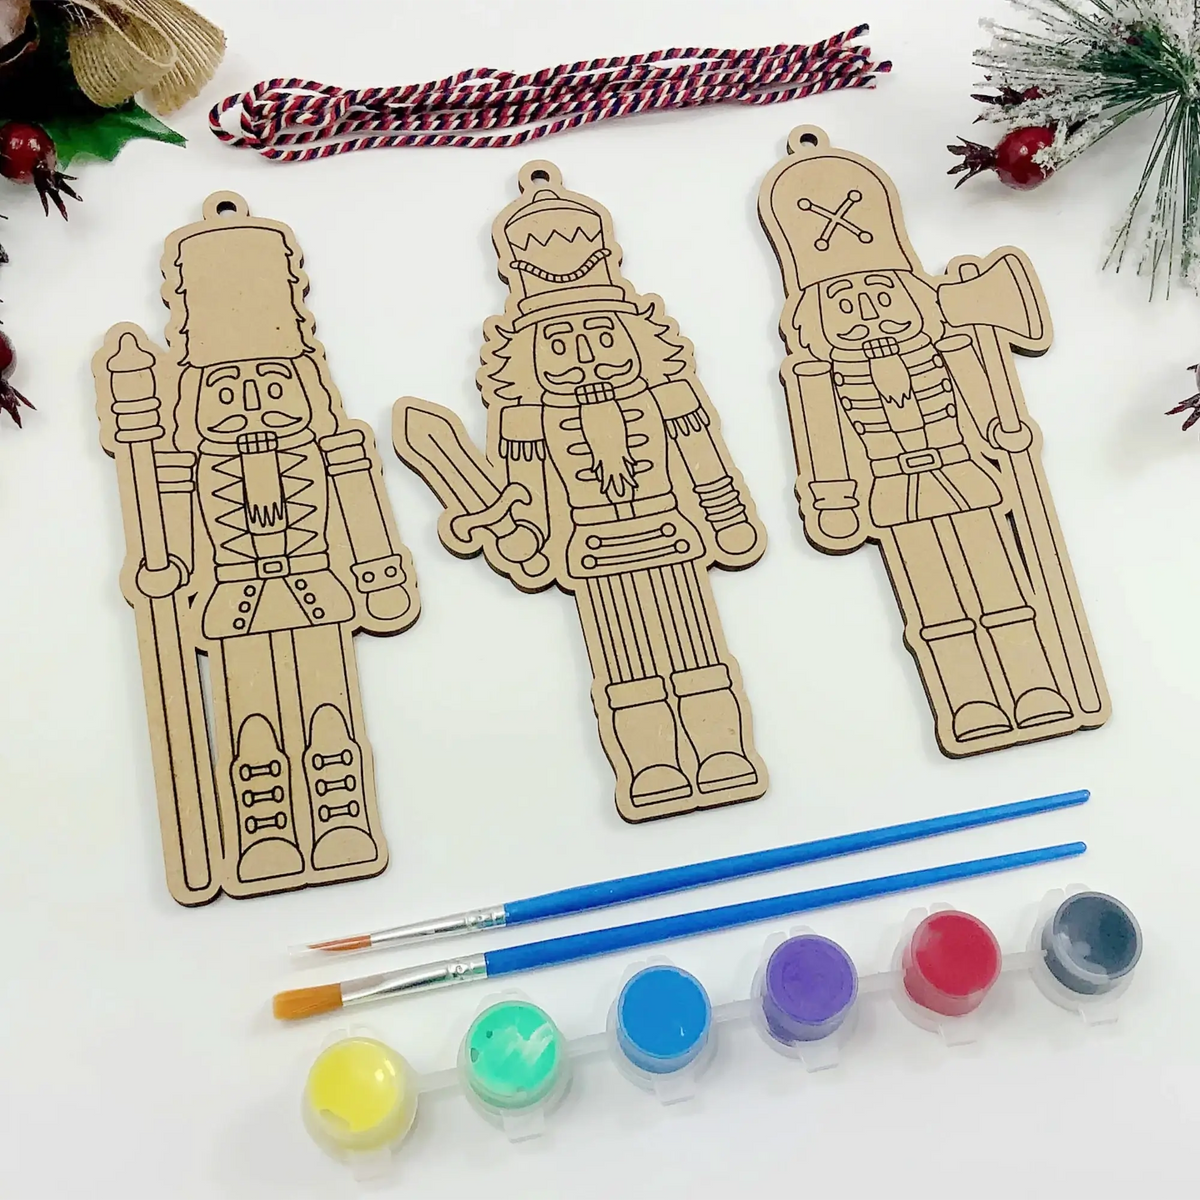 Nutcracker Soldier Christmas Painting Craft Kit